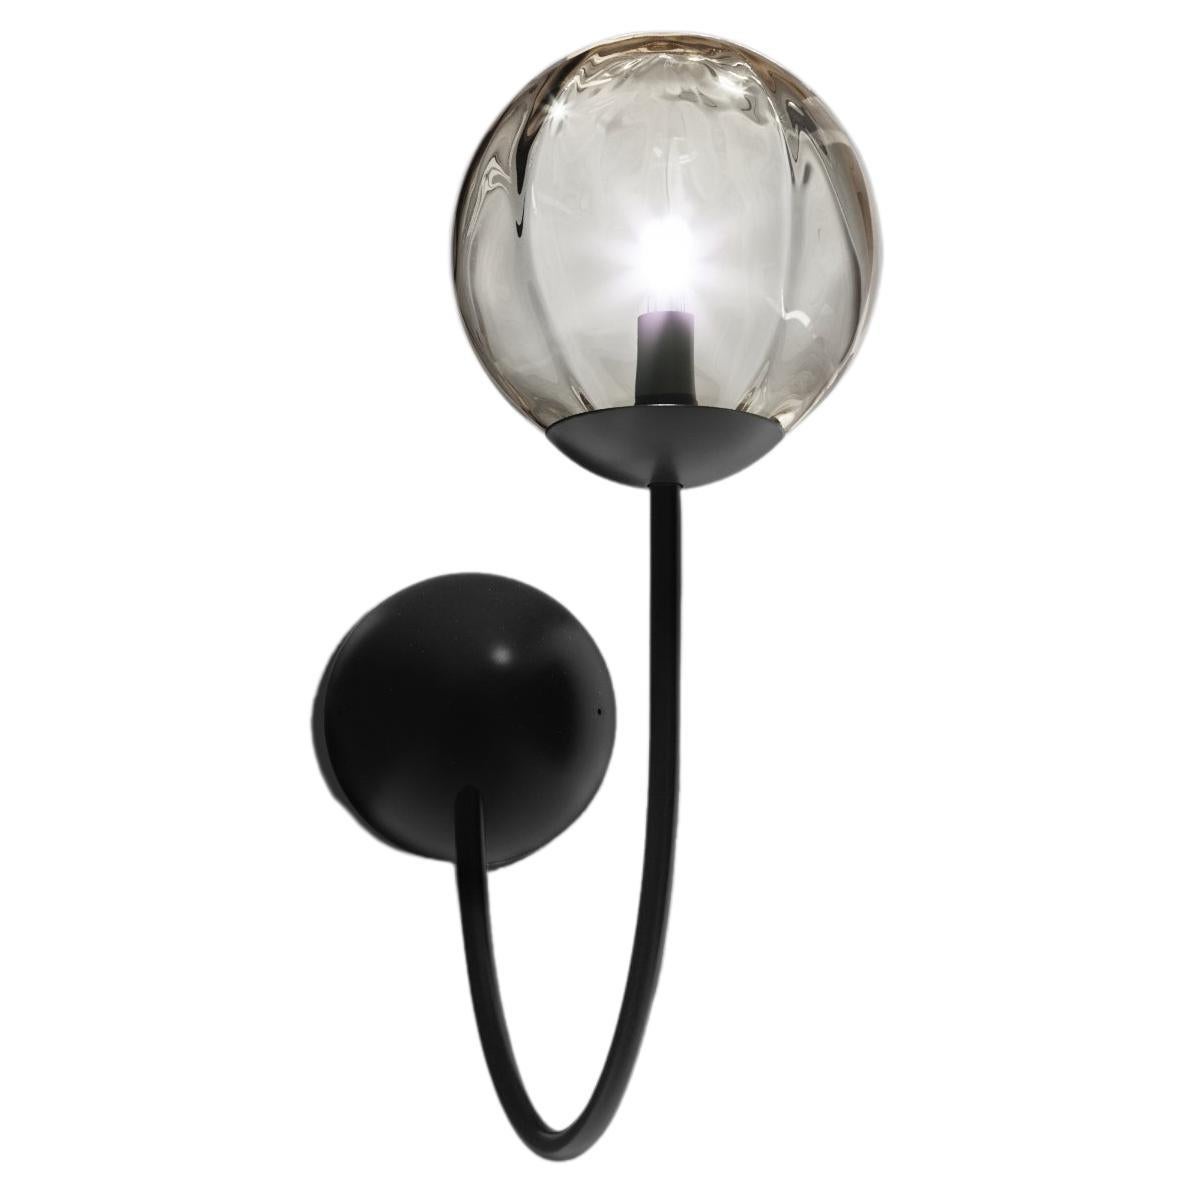 Vistosi Puppet Wall Sconce Light in Smoky Transparent Glass And Matt Black Frame For Sale